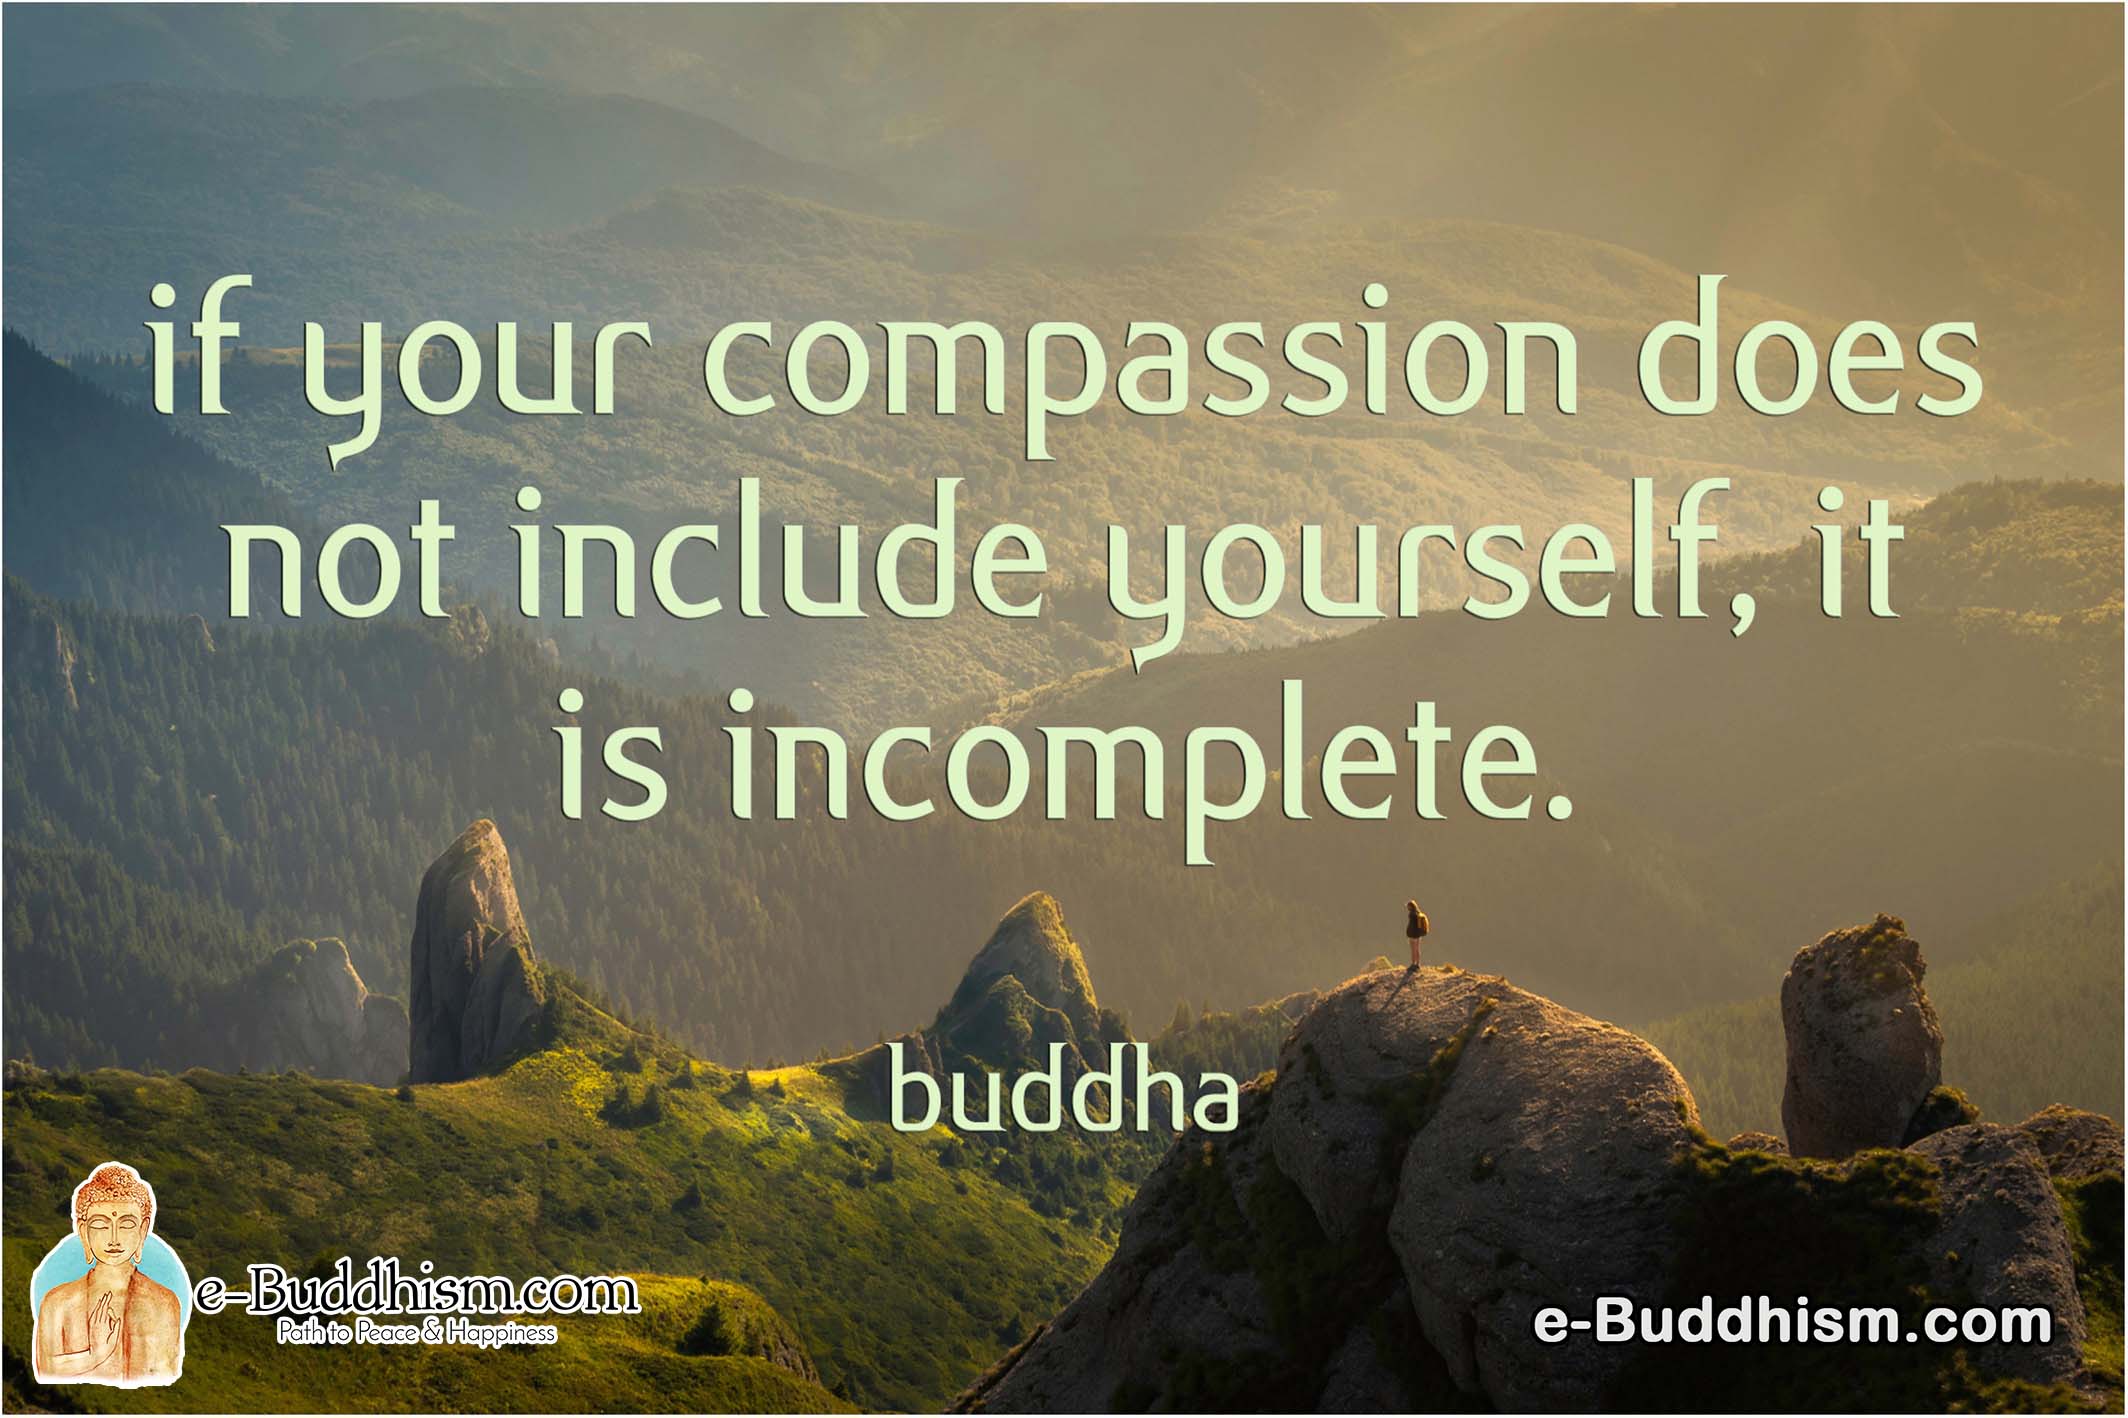 If your compassion does not include yourself, it is incomplete. -Buddha